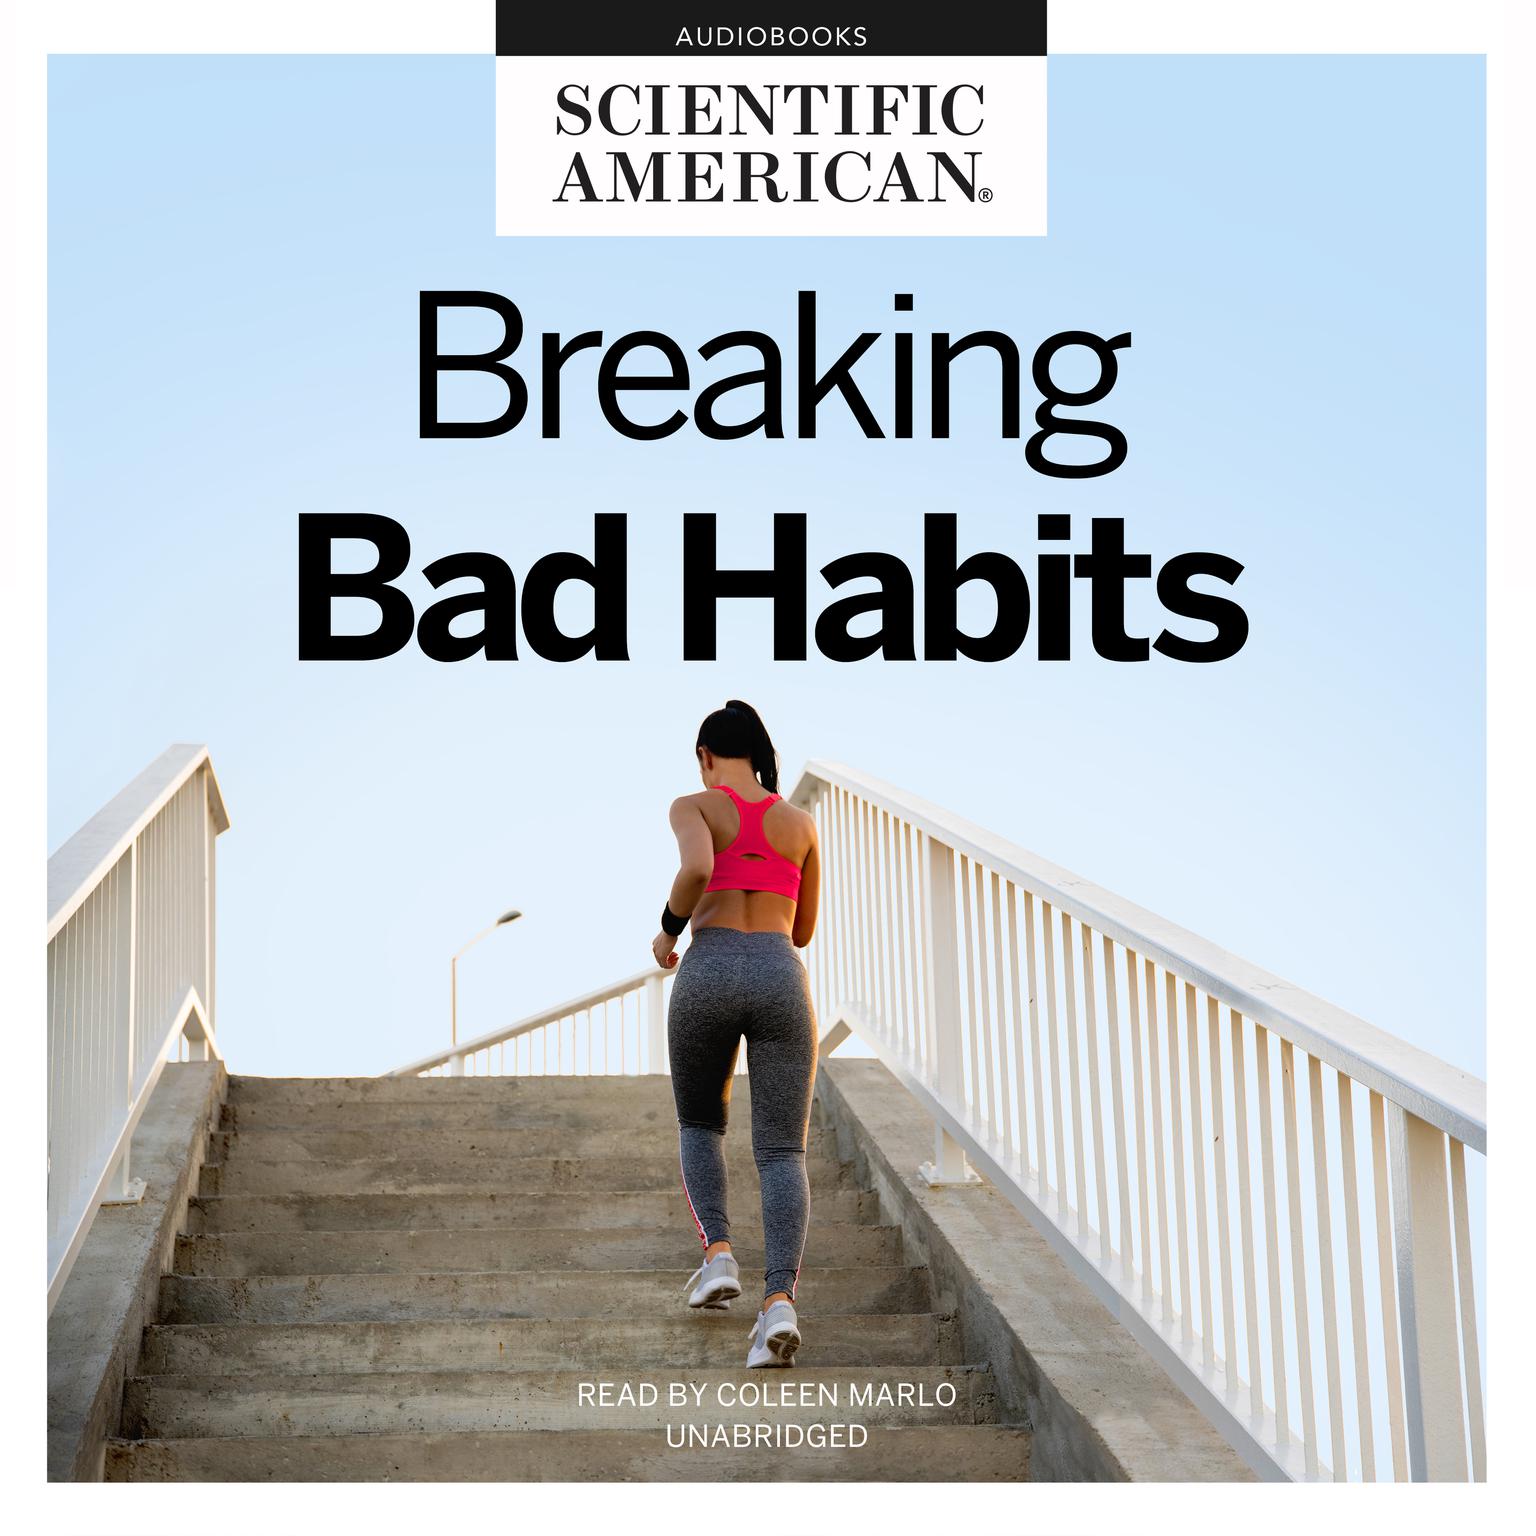 Breaking Bad Habits: Finding Happiness through Change Audiobook, by Scientific American